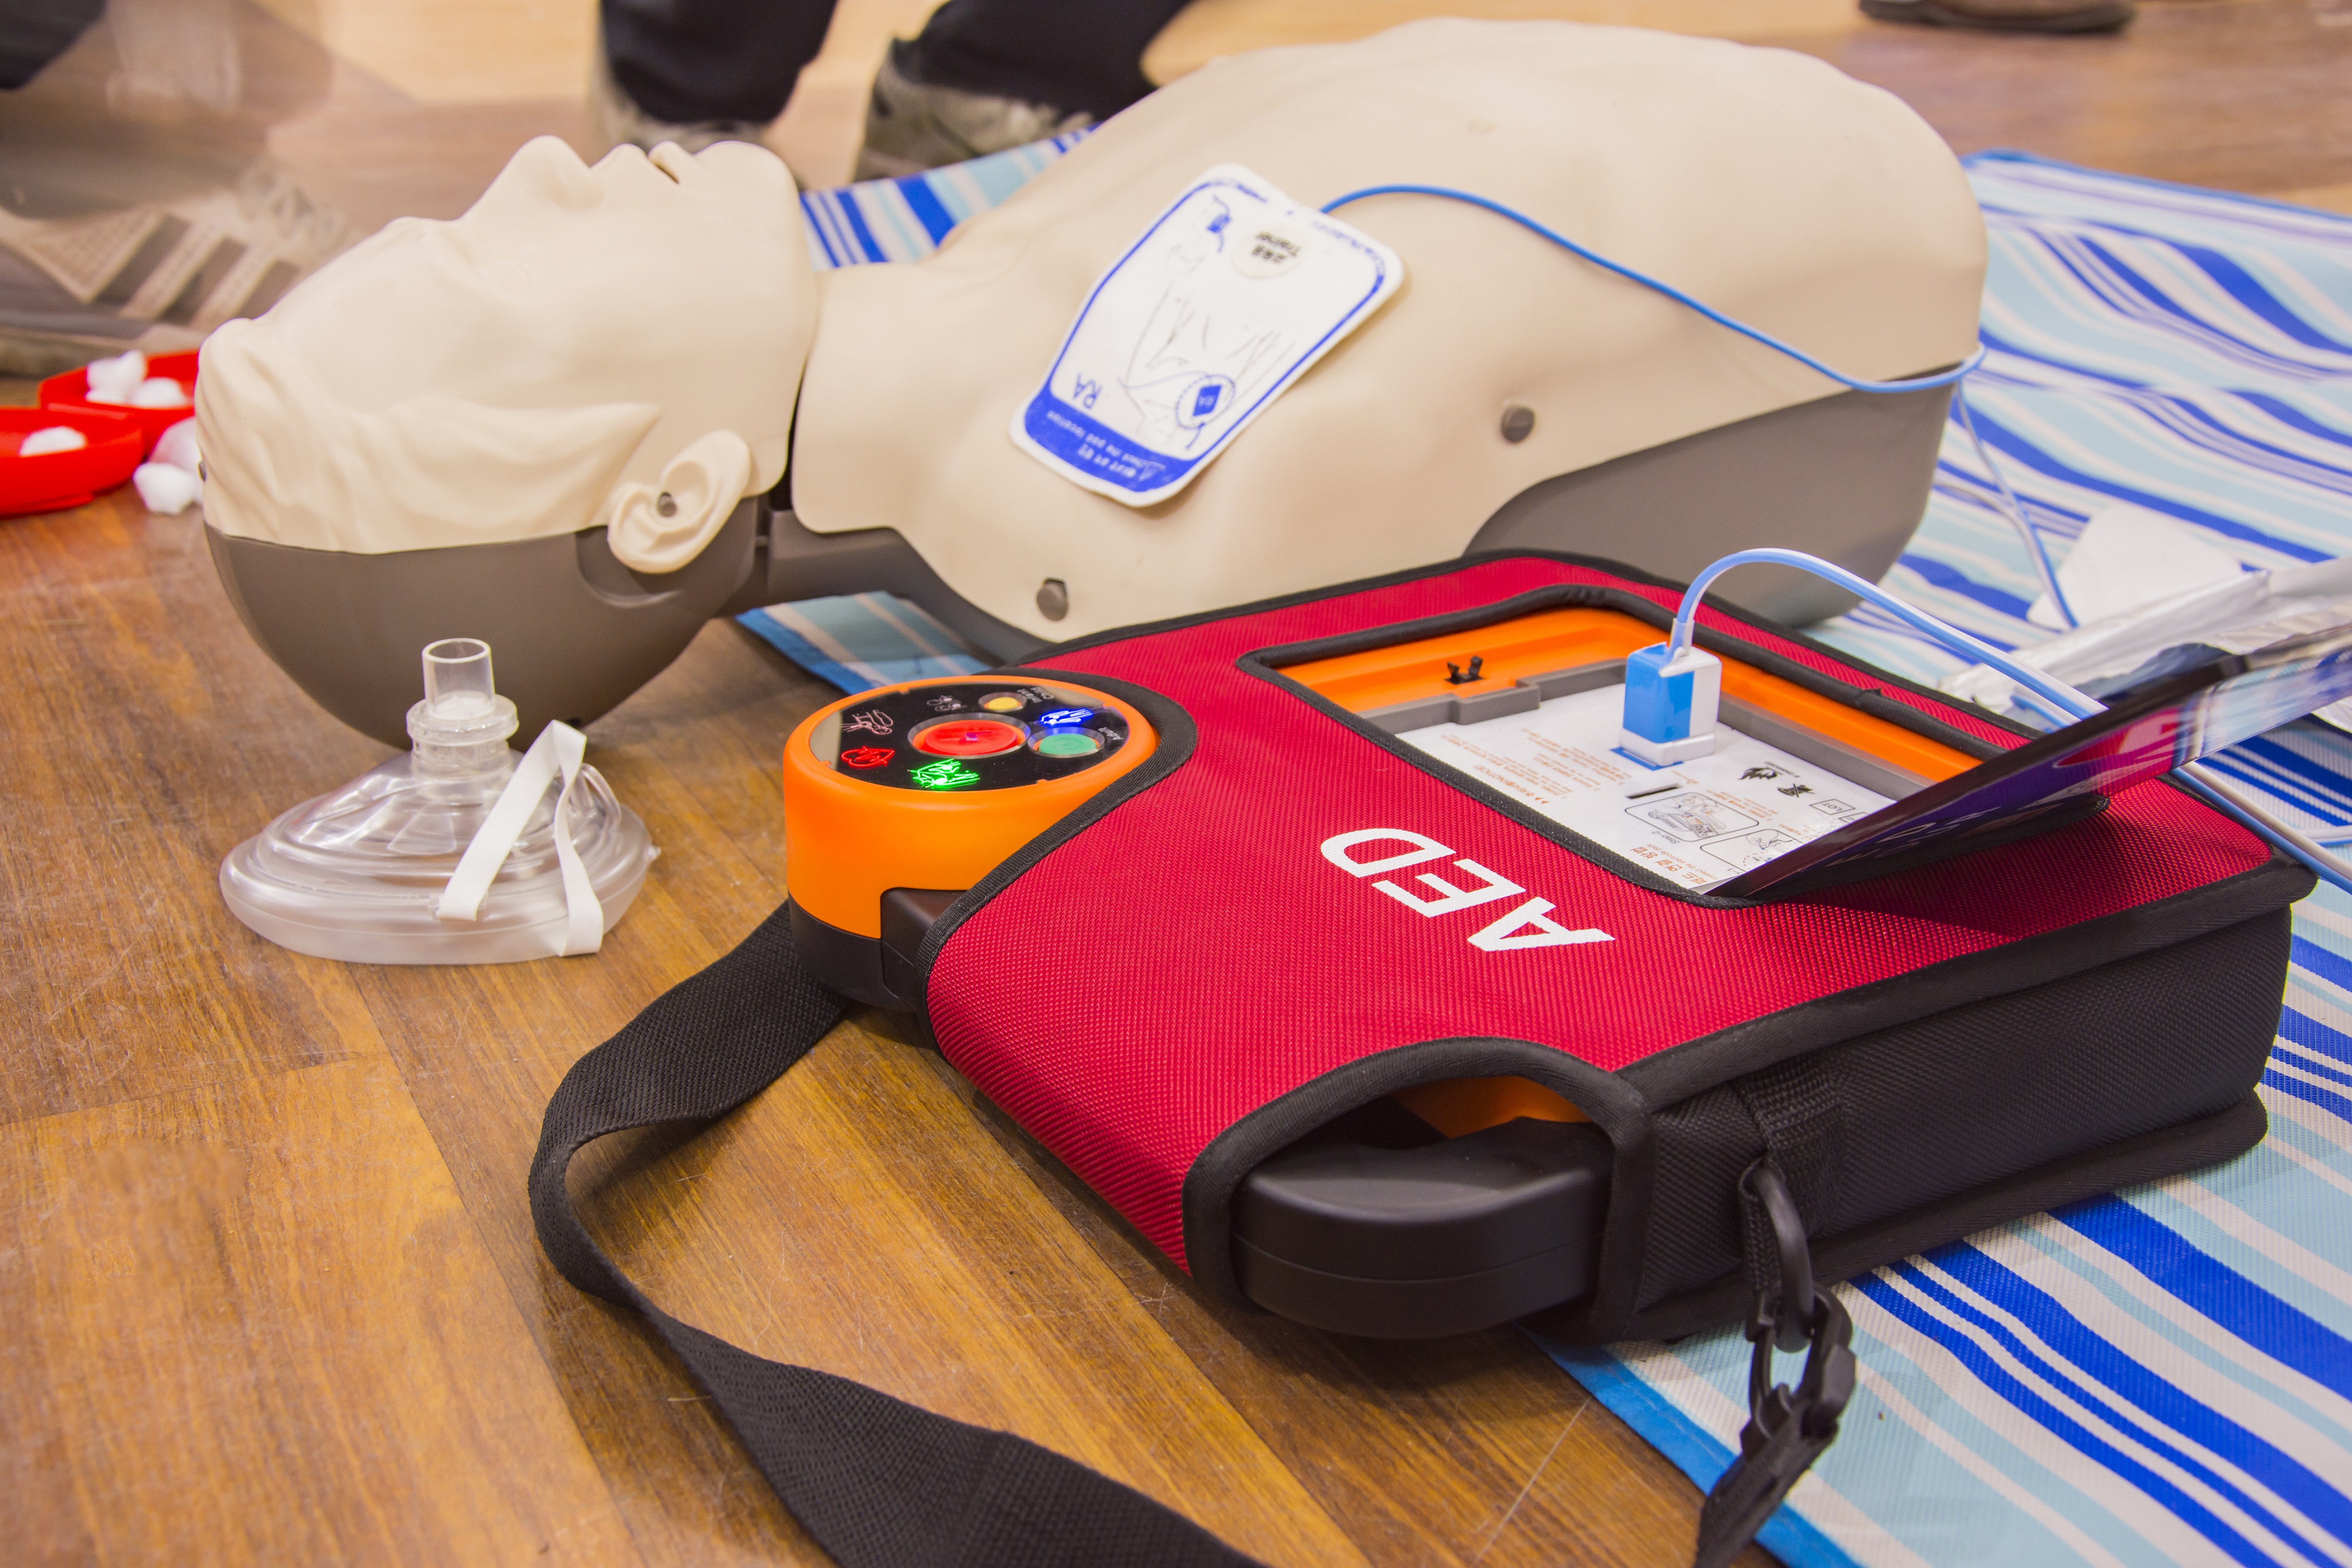 CPR AED First Aid Training Class December 17, 2022 in Tigard